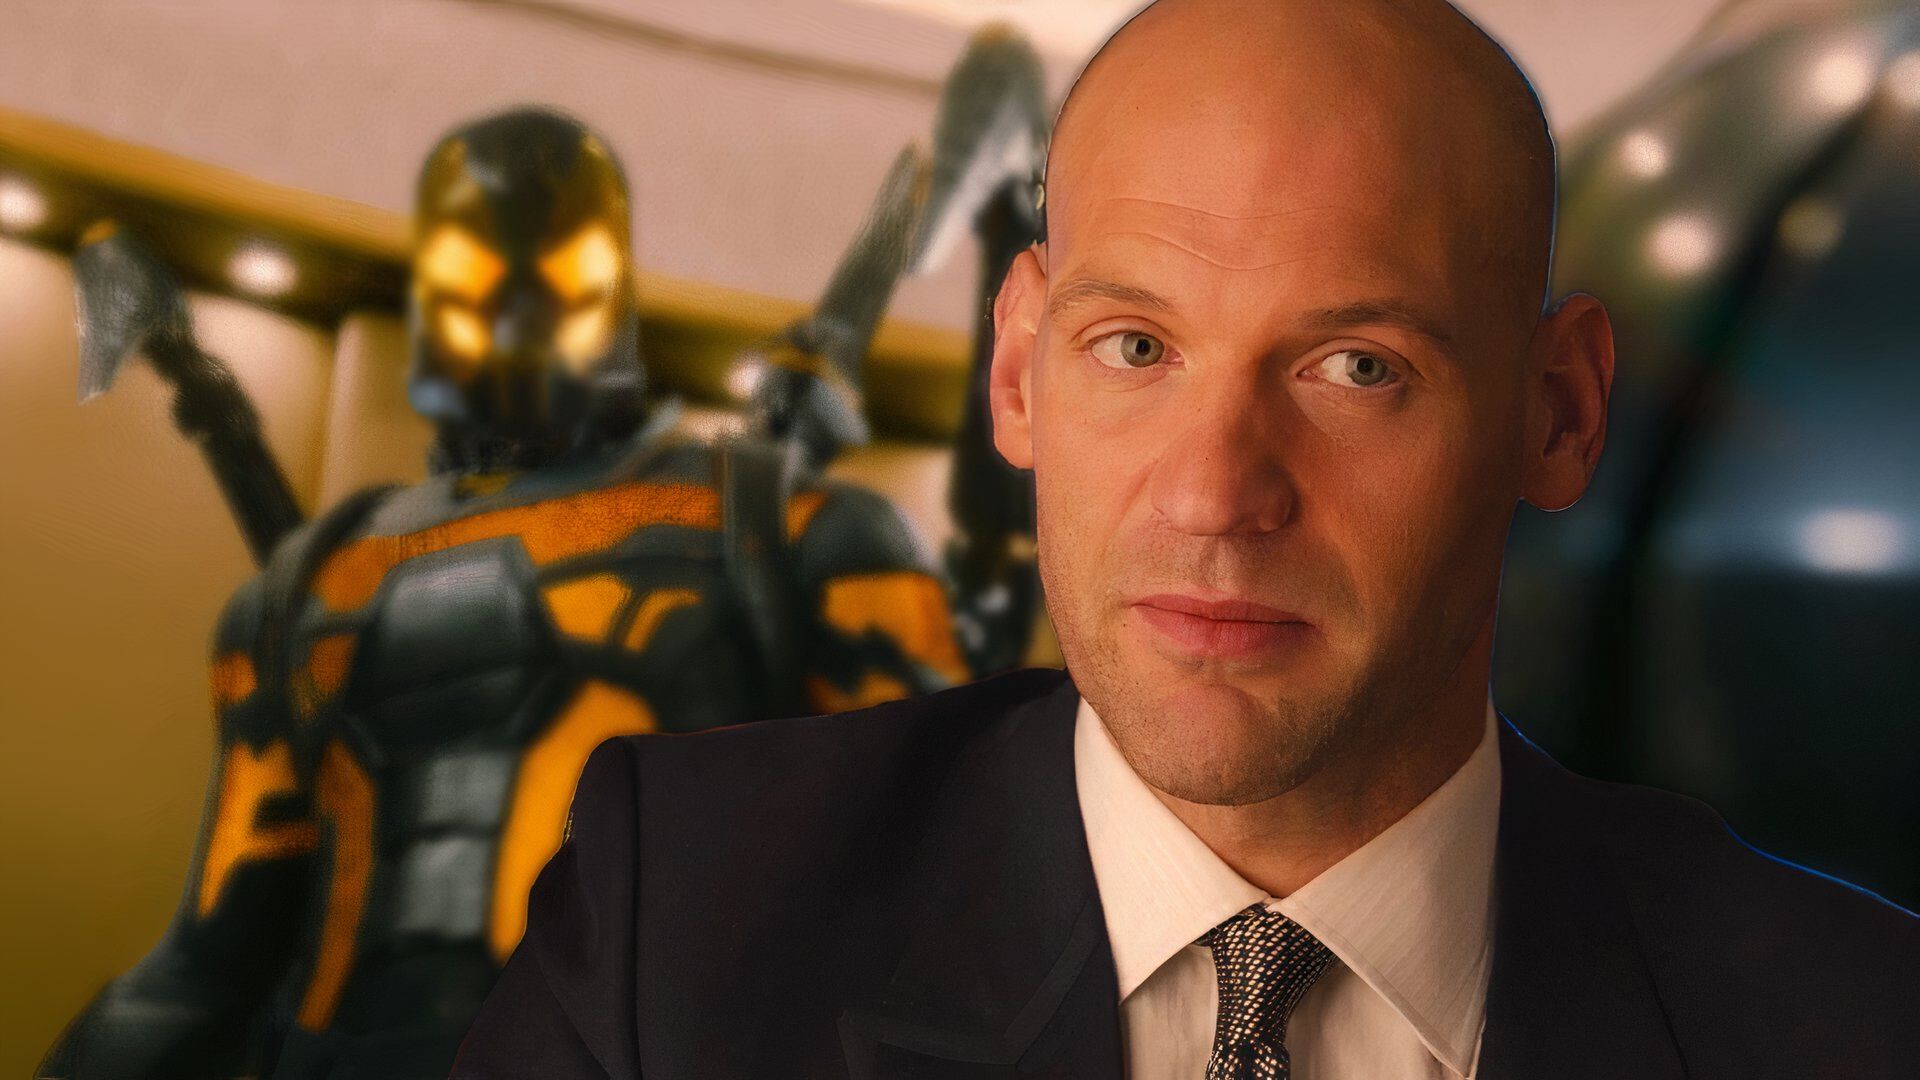 Corey Stoll as Darren Cross and Yellowjacket in Ant-Man